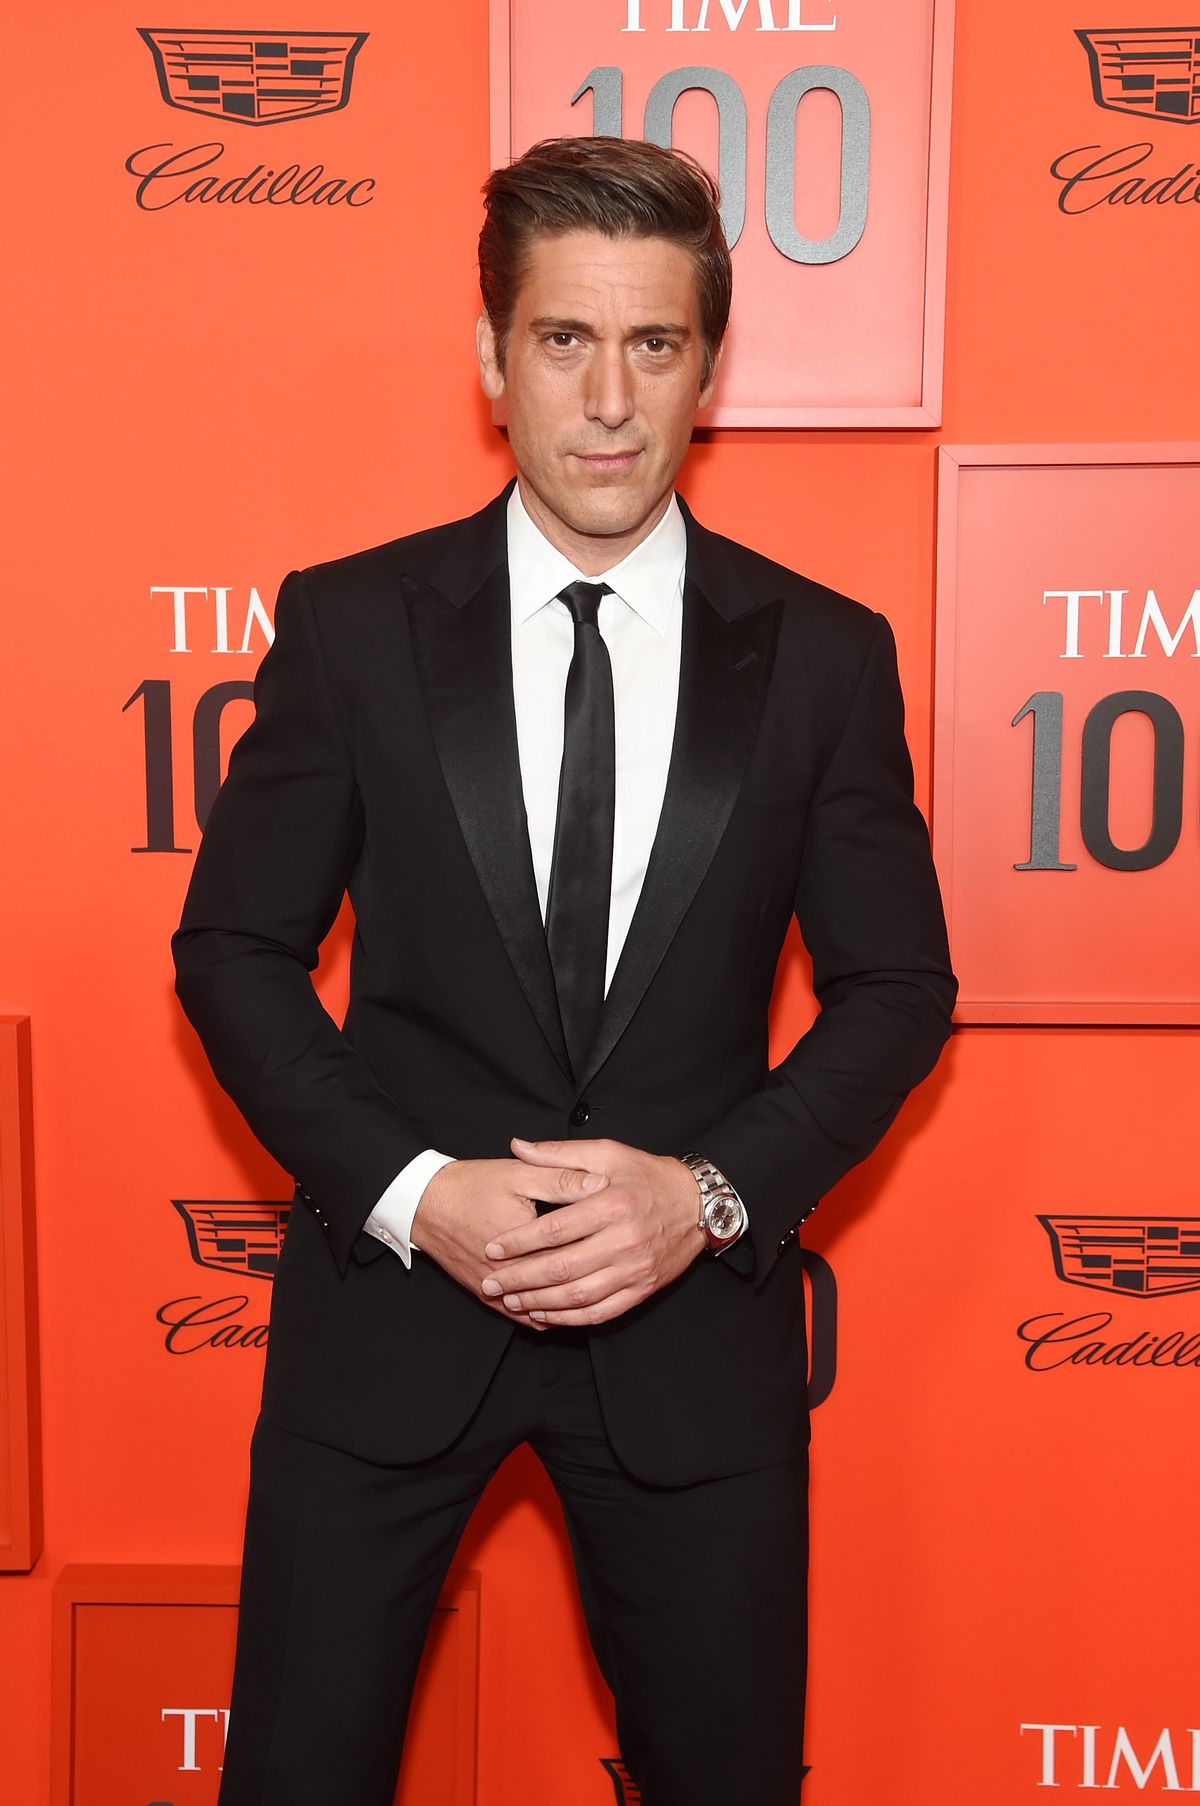 NEW YORK, NY - APRIL 23:  David Muir attends the 2019 Time 100 Gala at Frederick P. Rose Hall, Jazz at Lincoln Center on April 23, 2019 in New York City.  (Photo by Jamie McCarthy/WireImage) (Jamie McCarthy/WireImage)